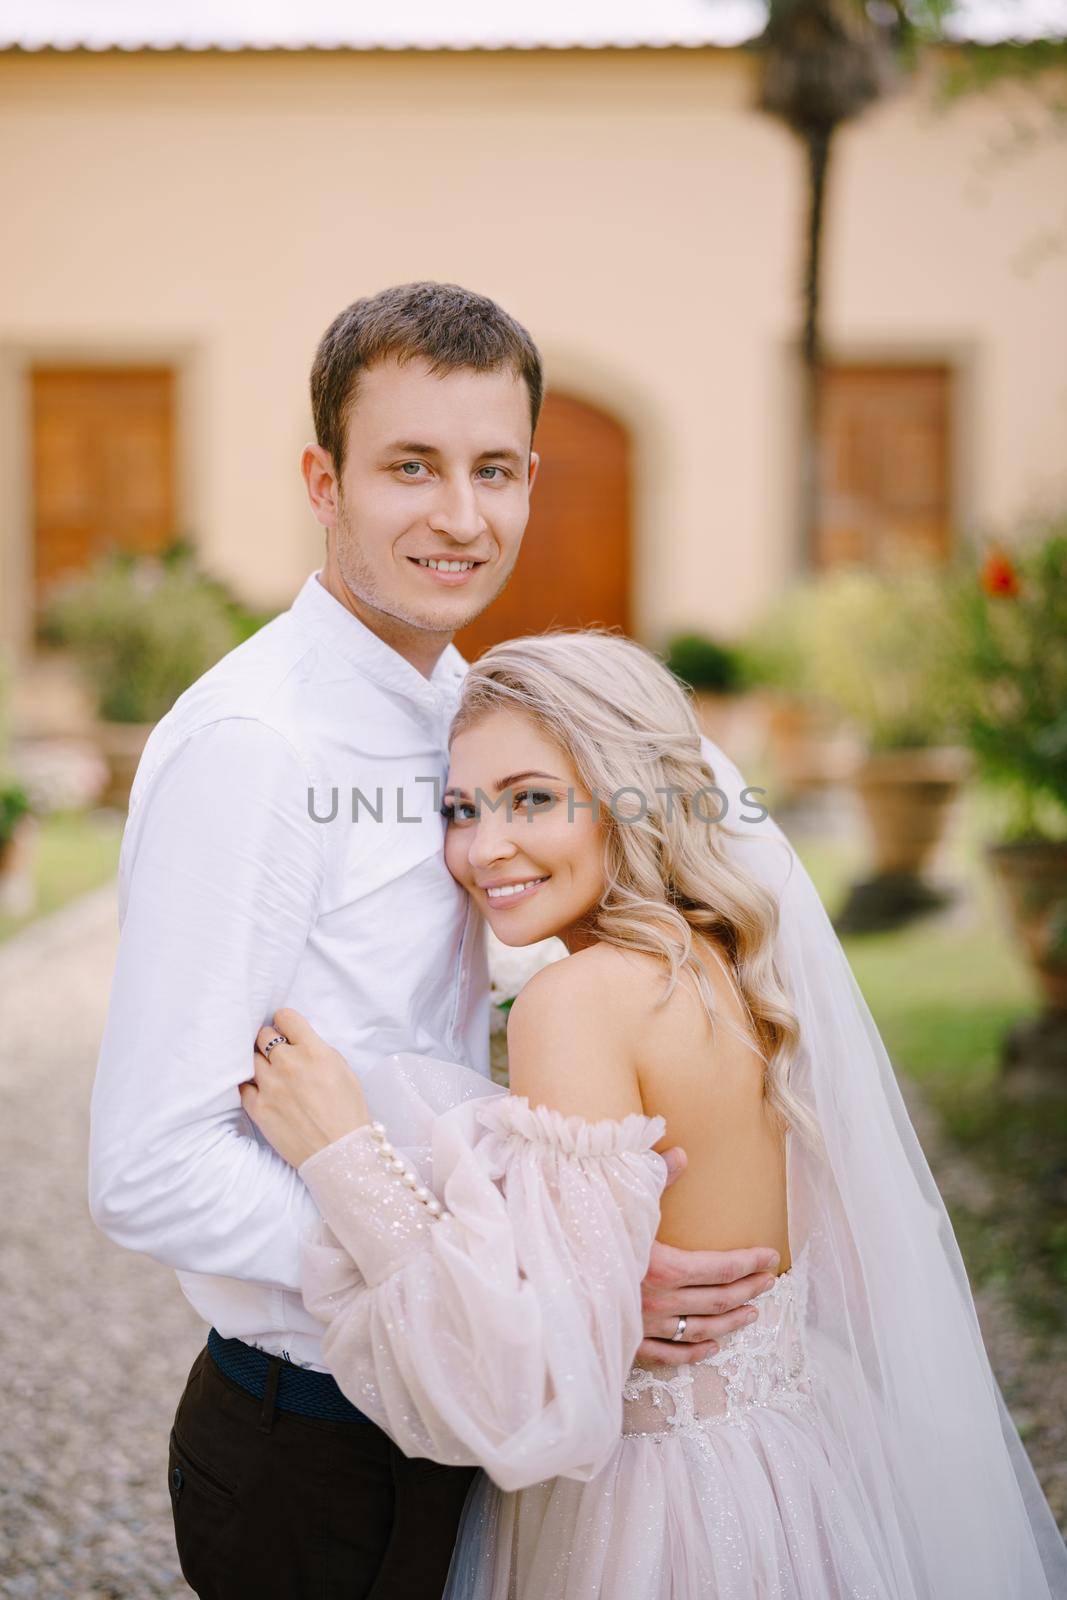 Wedding in Florence, Italy, in an old villa-winery. The young couple cuddles and looks into the camera.